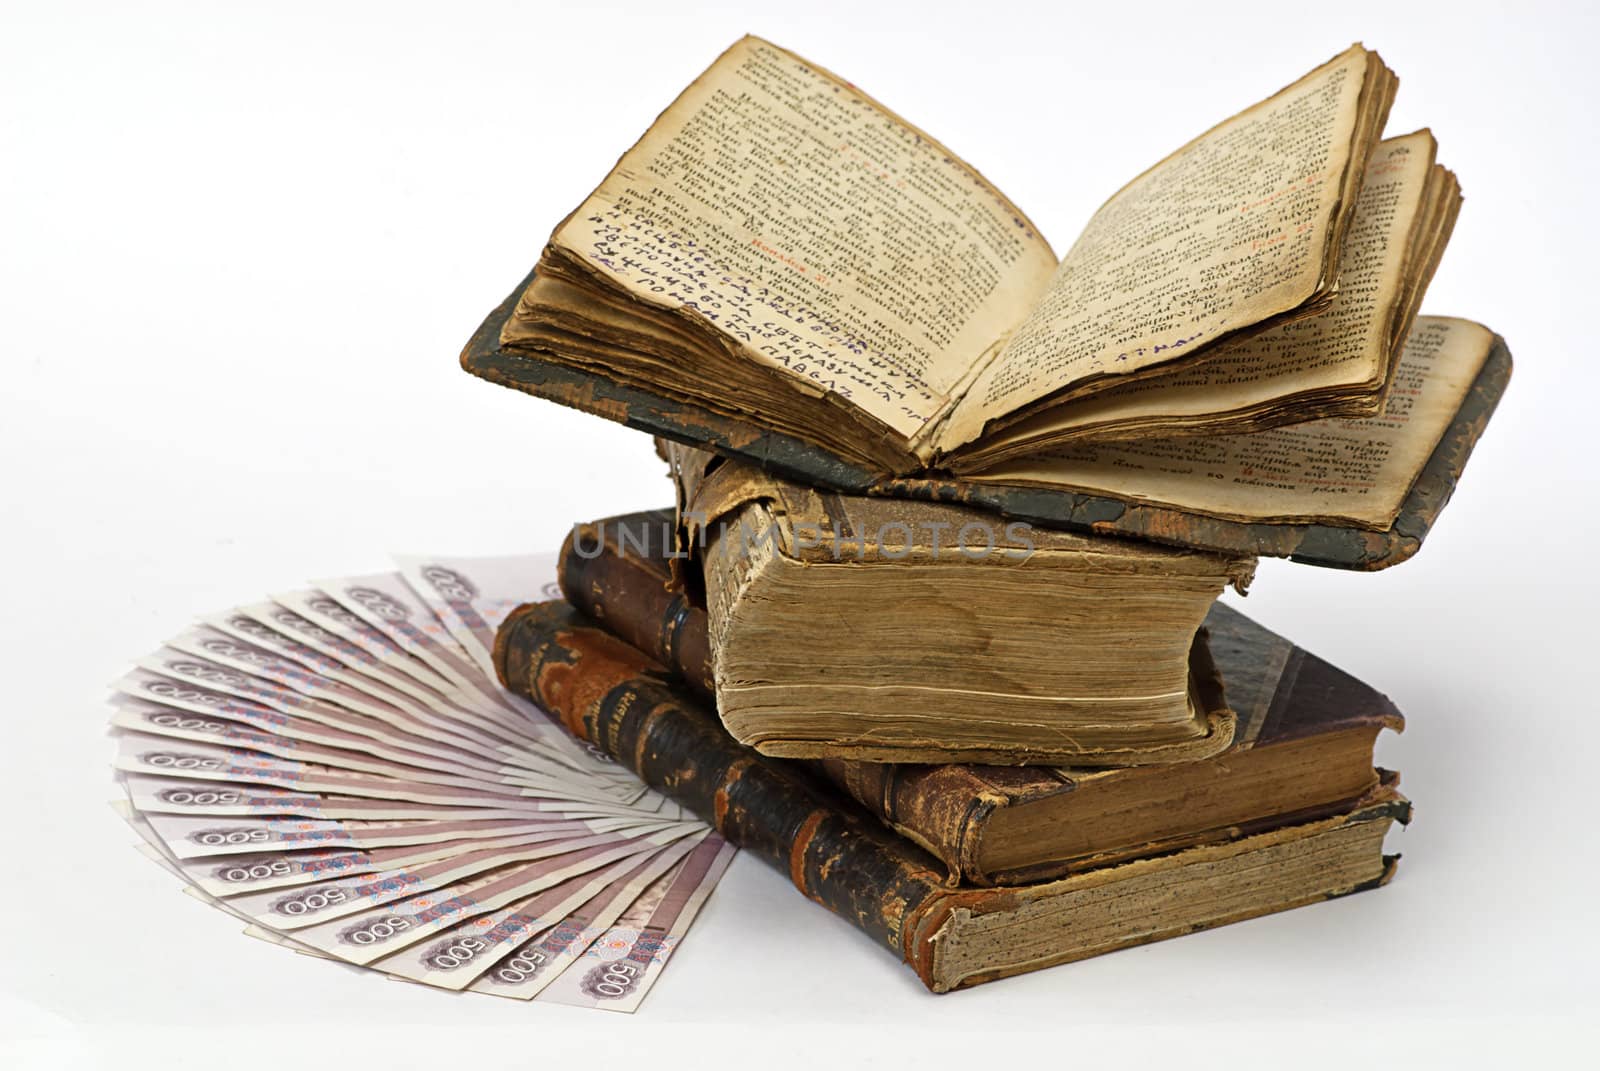 money and old  books isolated